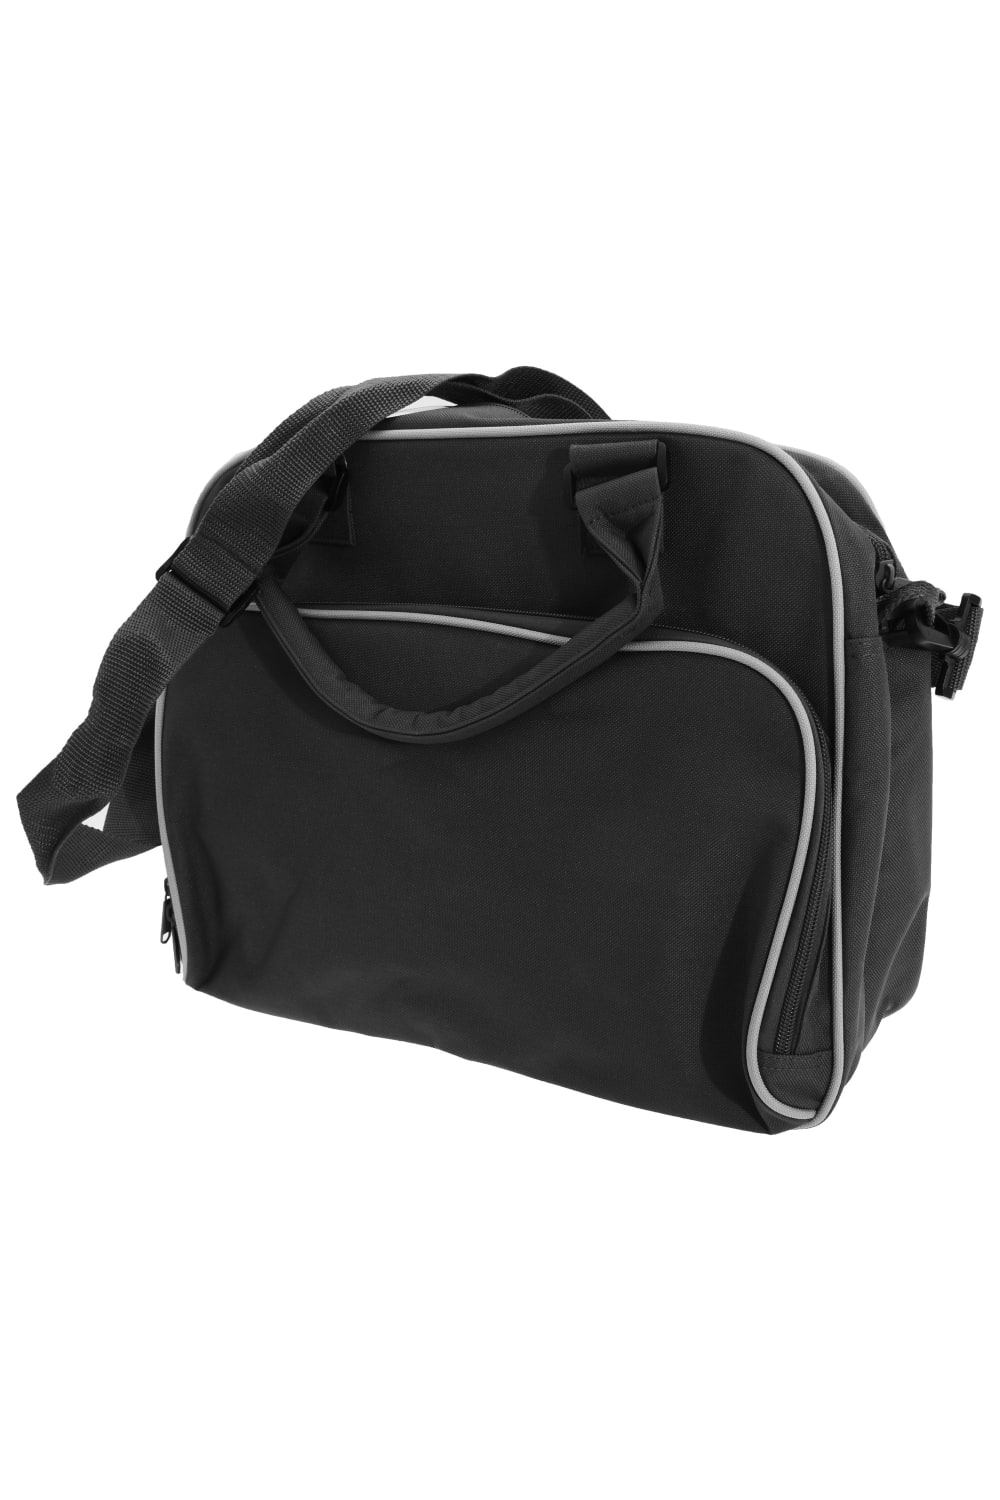 Bagbase Compact Junior Dance Messenger Bag (15 Liters) (Black/White) (One Size)